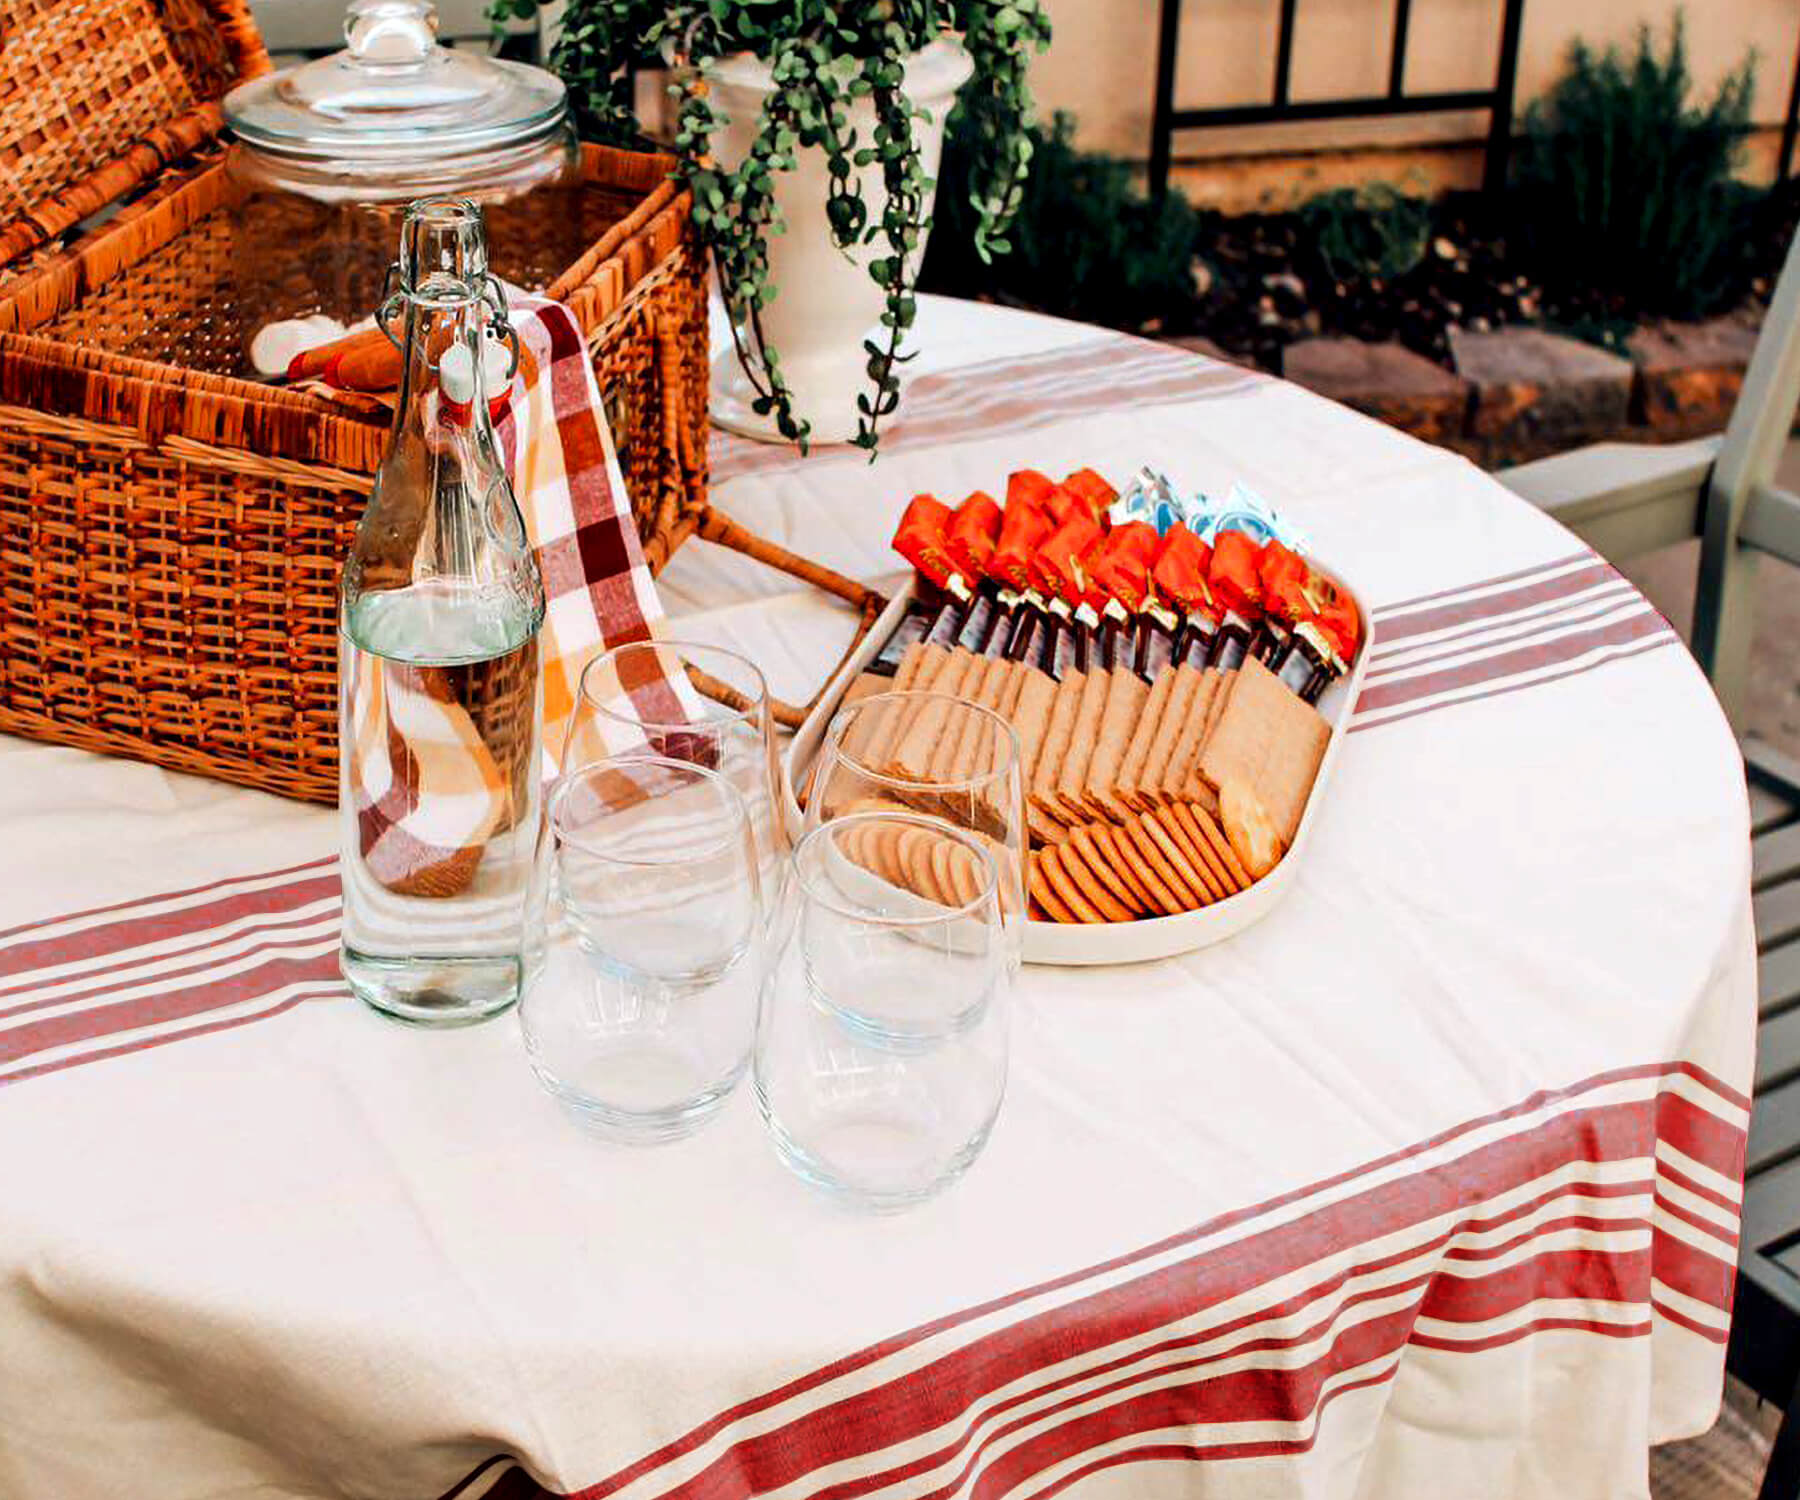 Explore the charm of yesteryears with a vintage tablecloth, evoking memories of bygone eras and adding character to your table.